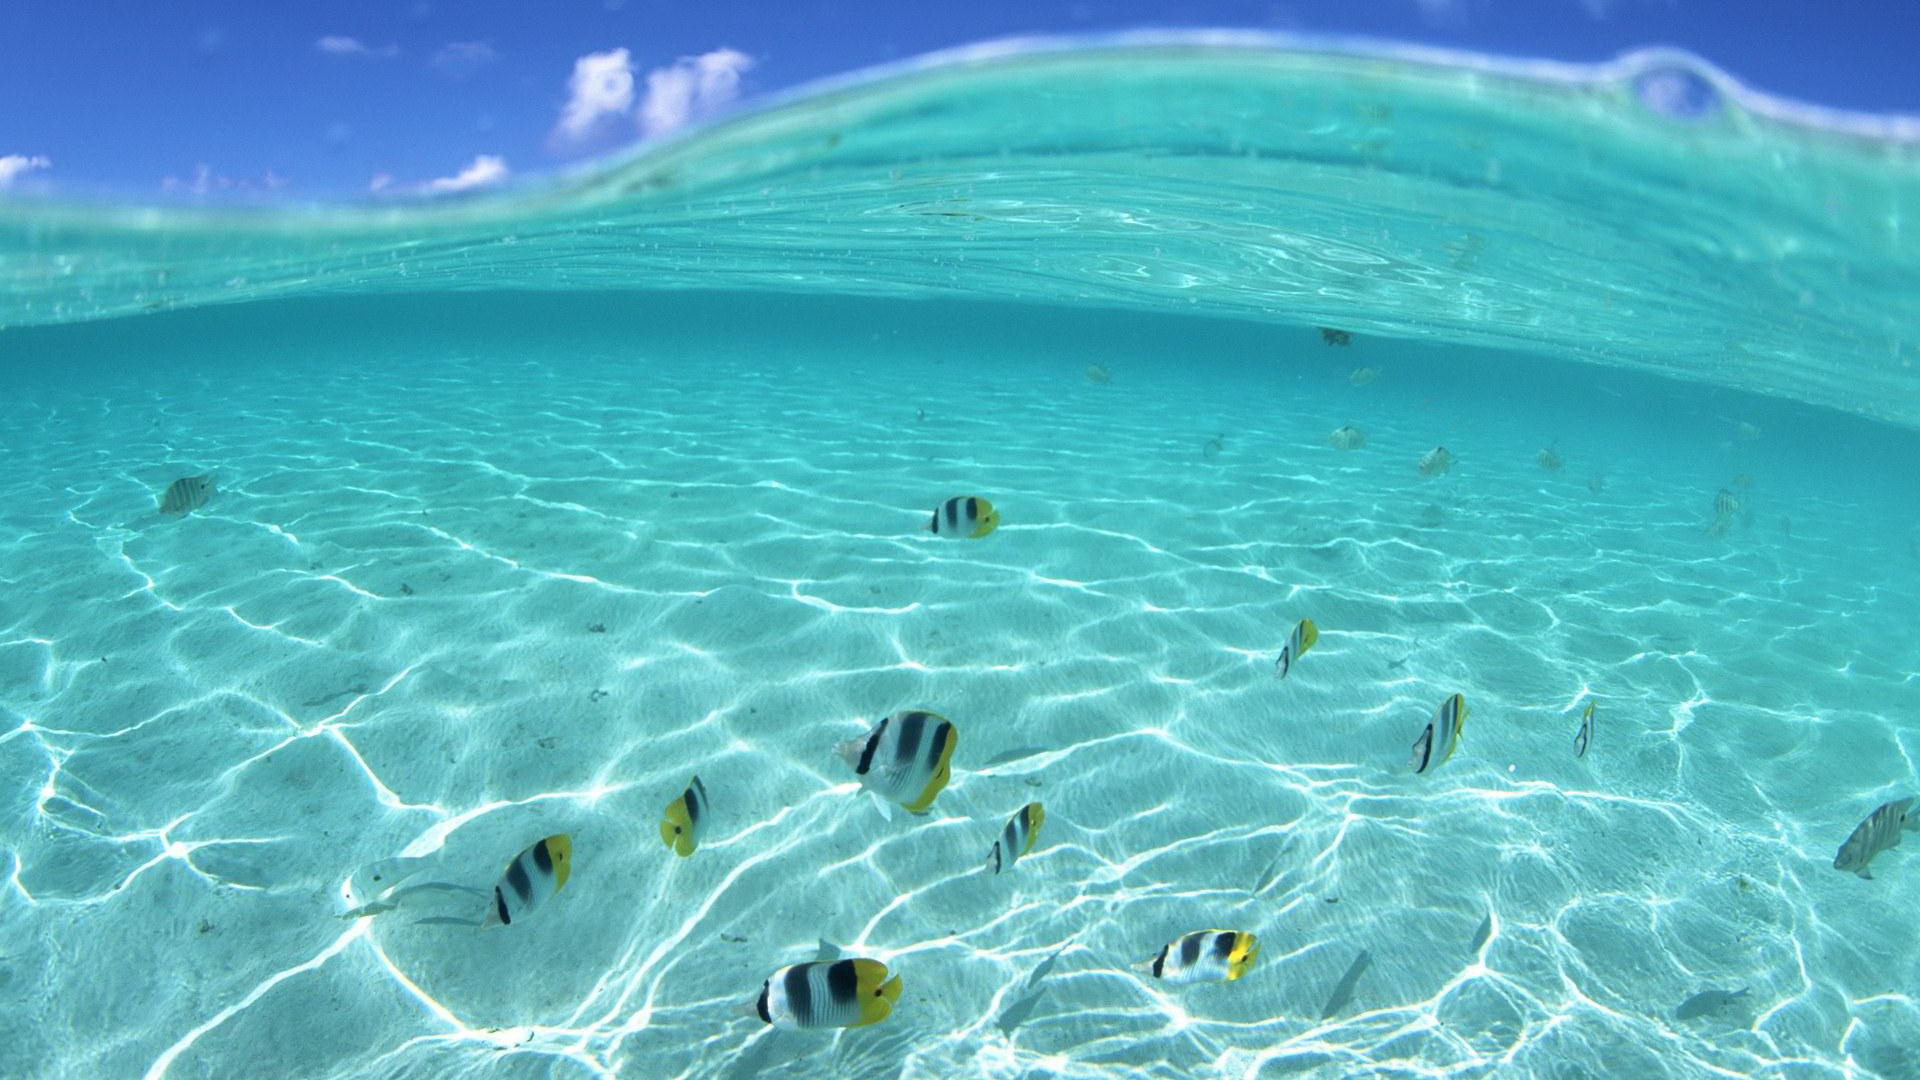 Pics of Clear Sea - The Sea is Incredibly Blue and Clear, You Know Where Sea Fishes Are Going 1920X1080 free wallpaper download